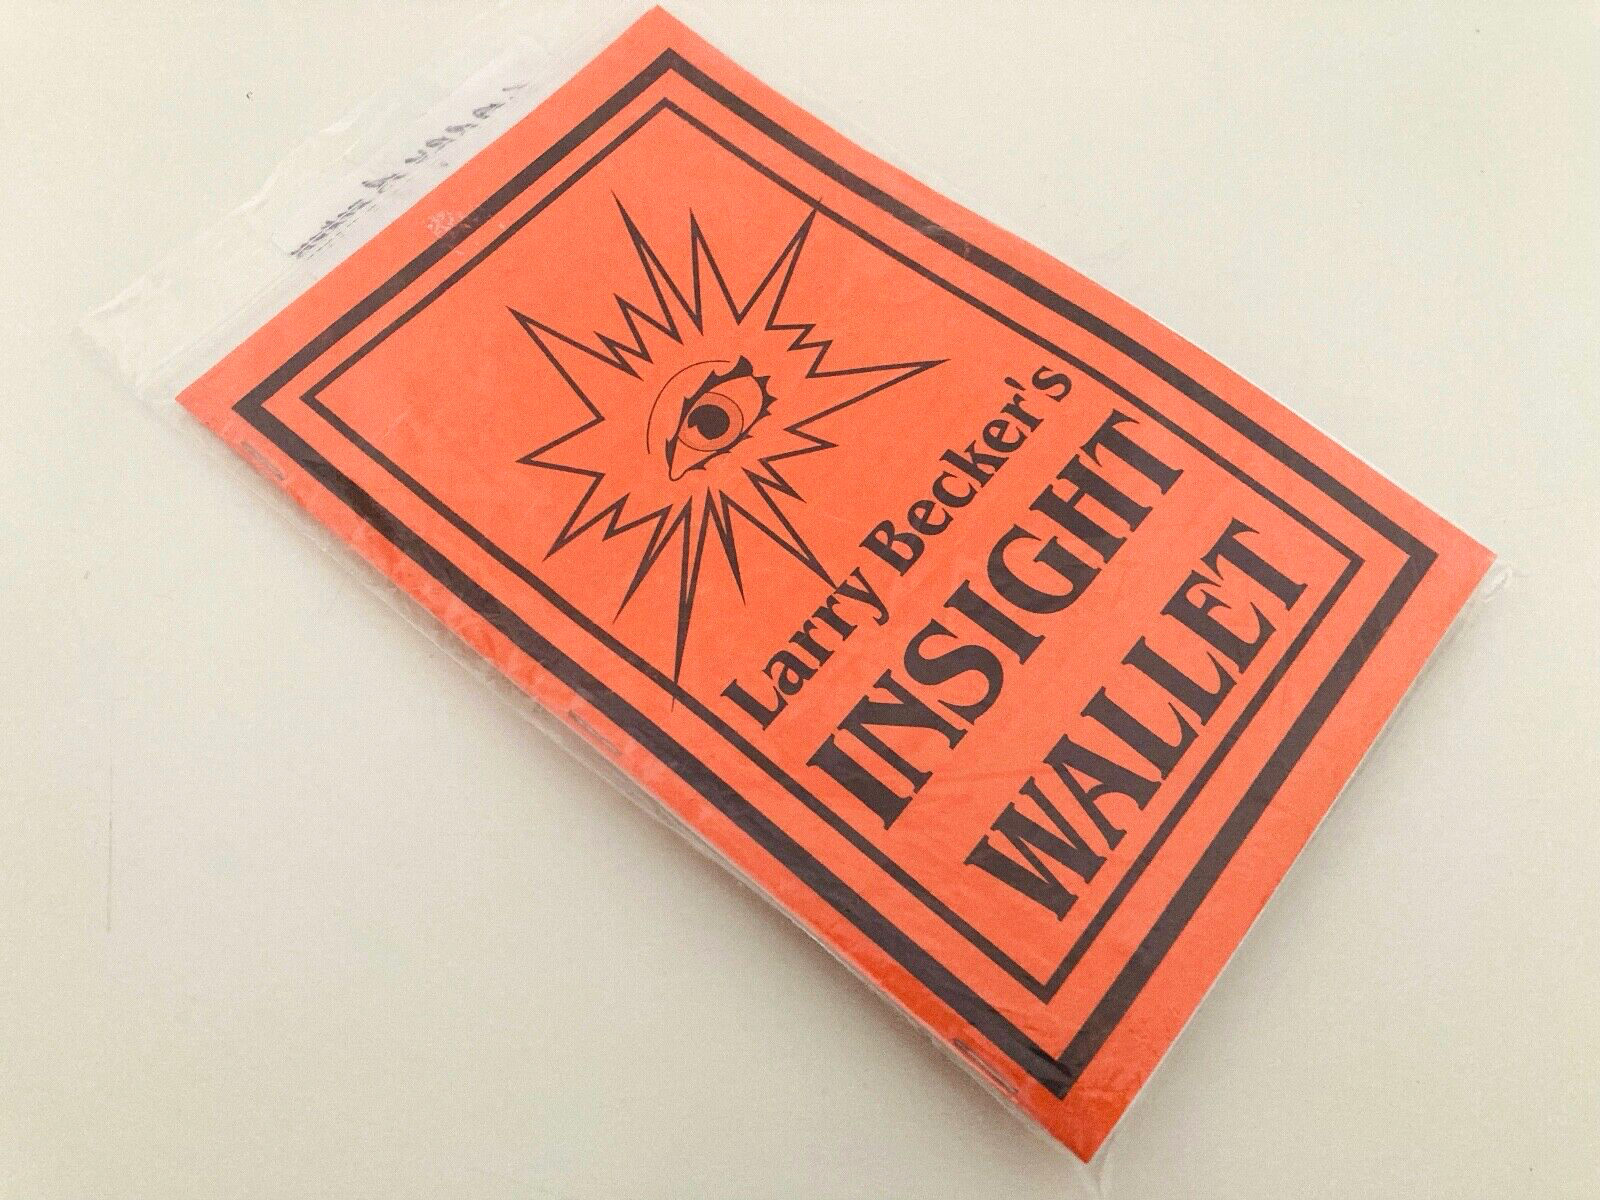 Larry Becker Insight Wallet Booklet shown closed at an angle